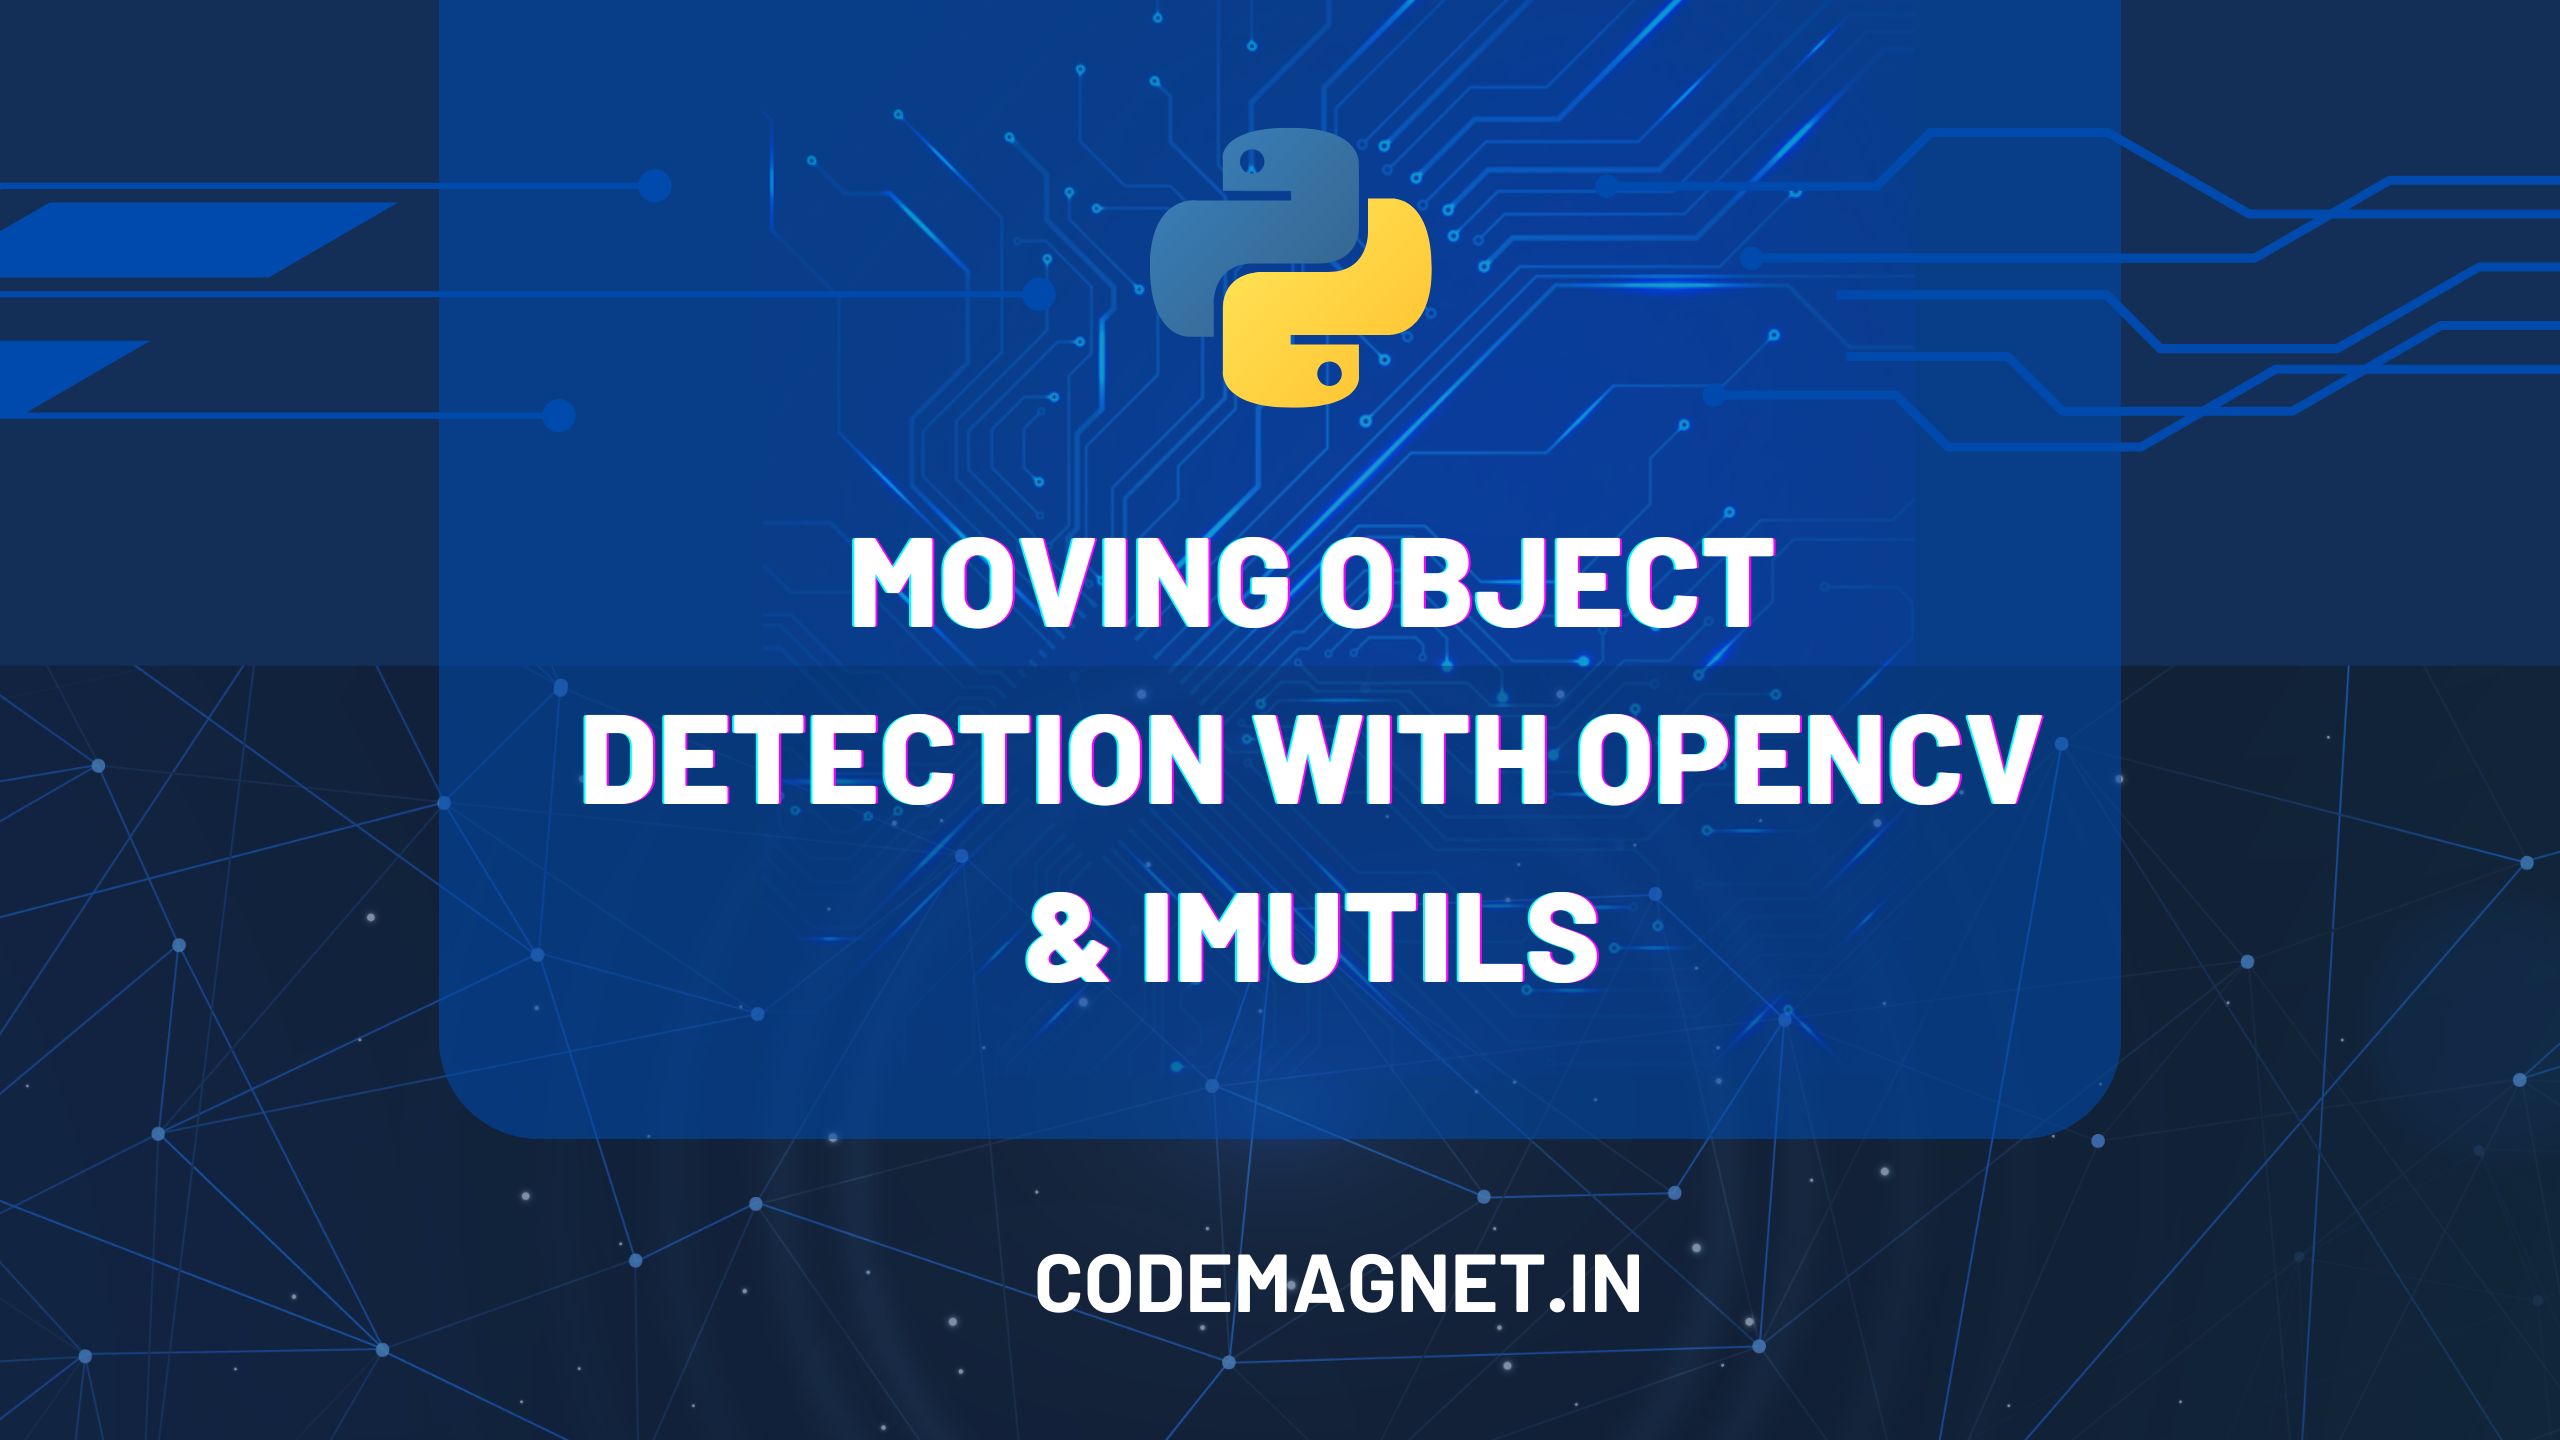 Moving Object Detection with OpenCv & Imutils